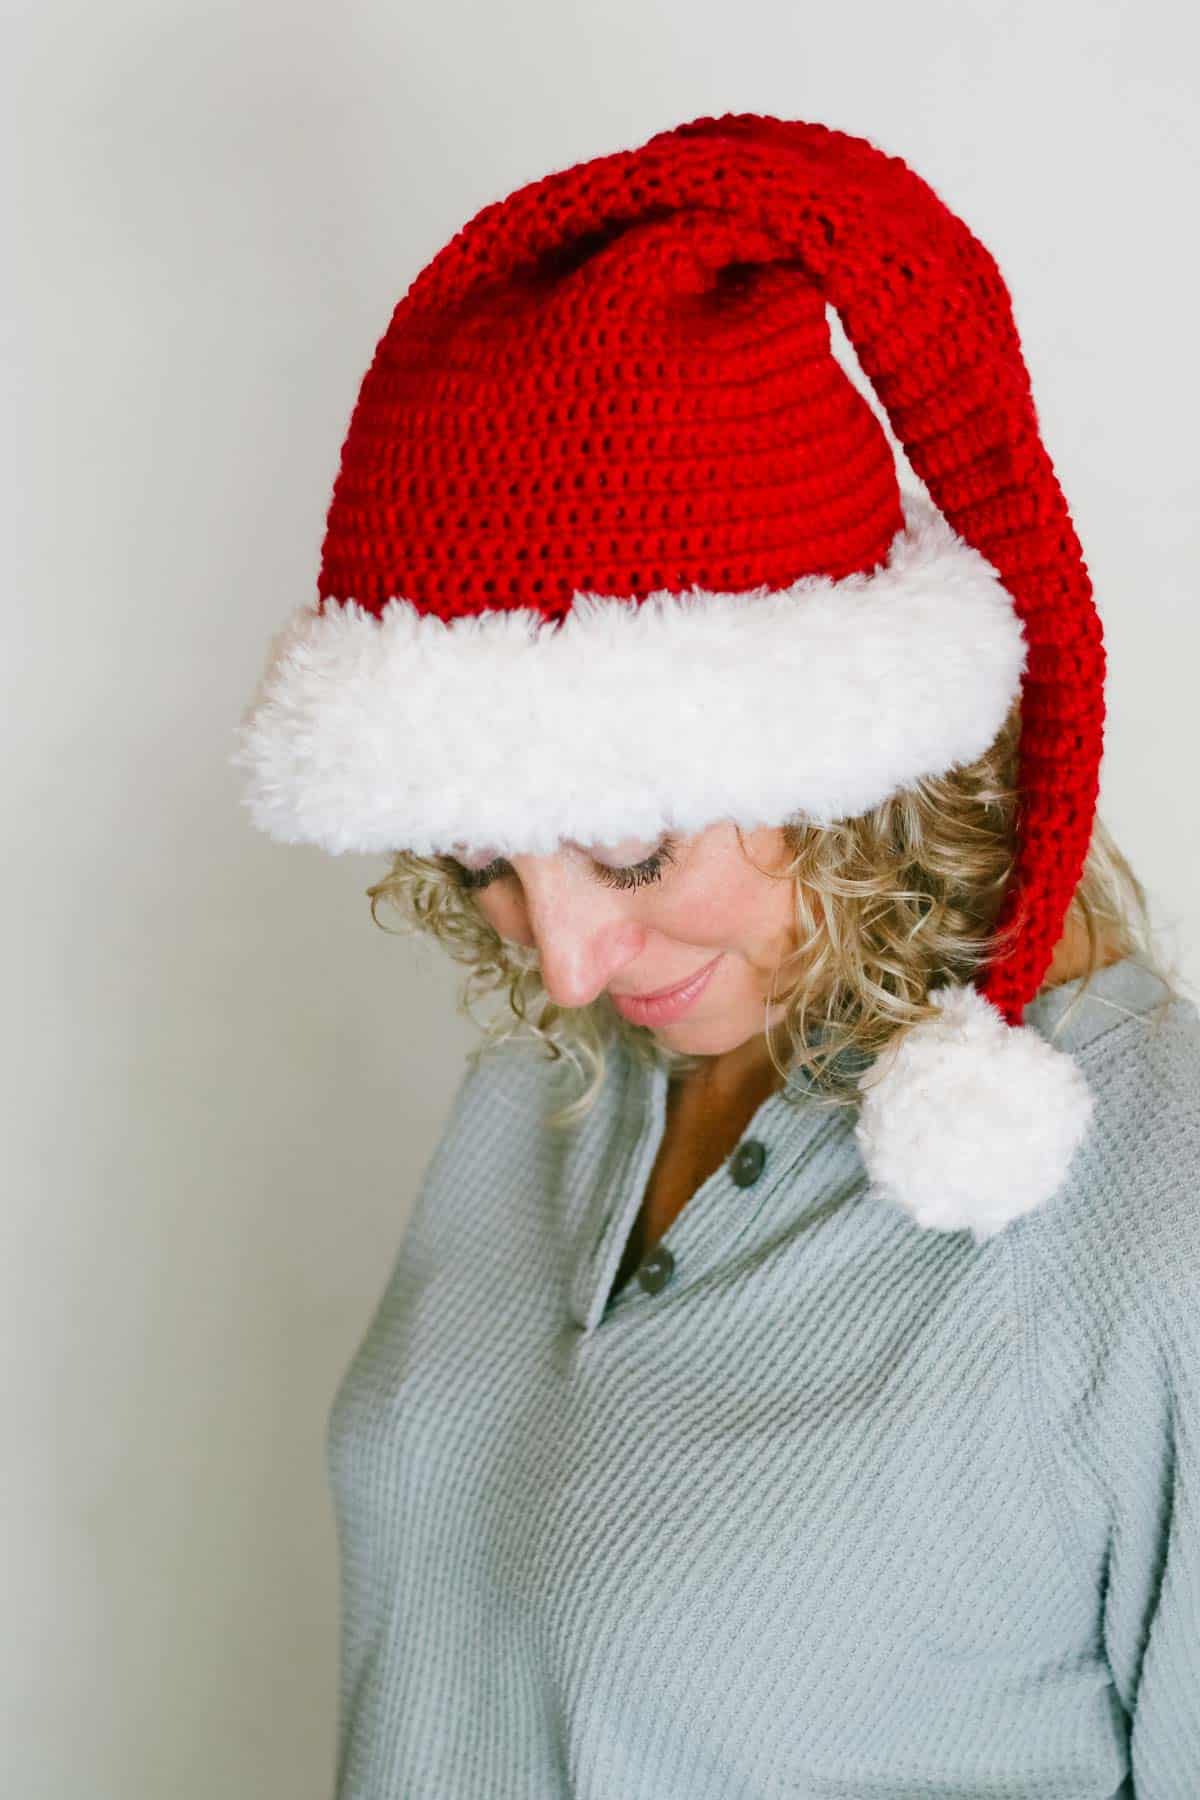 Adult woman wearing a crocheted Santa hat with a fur brim.